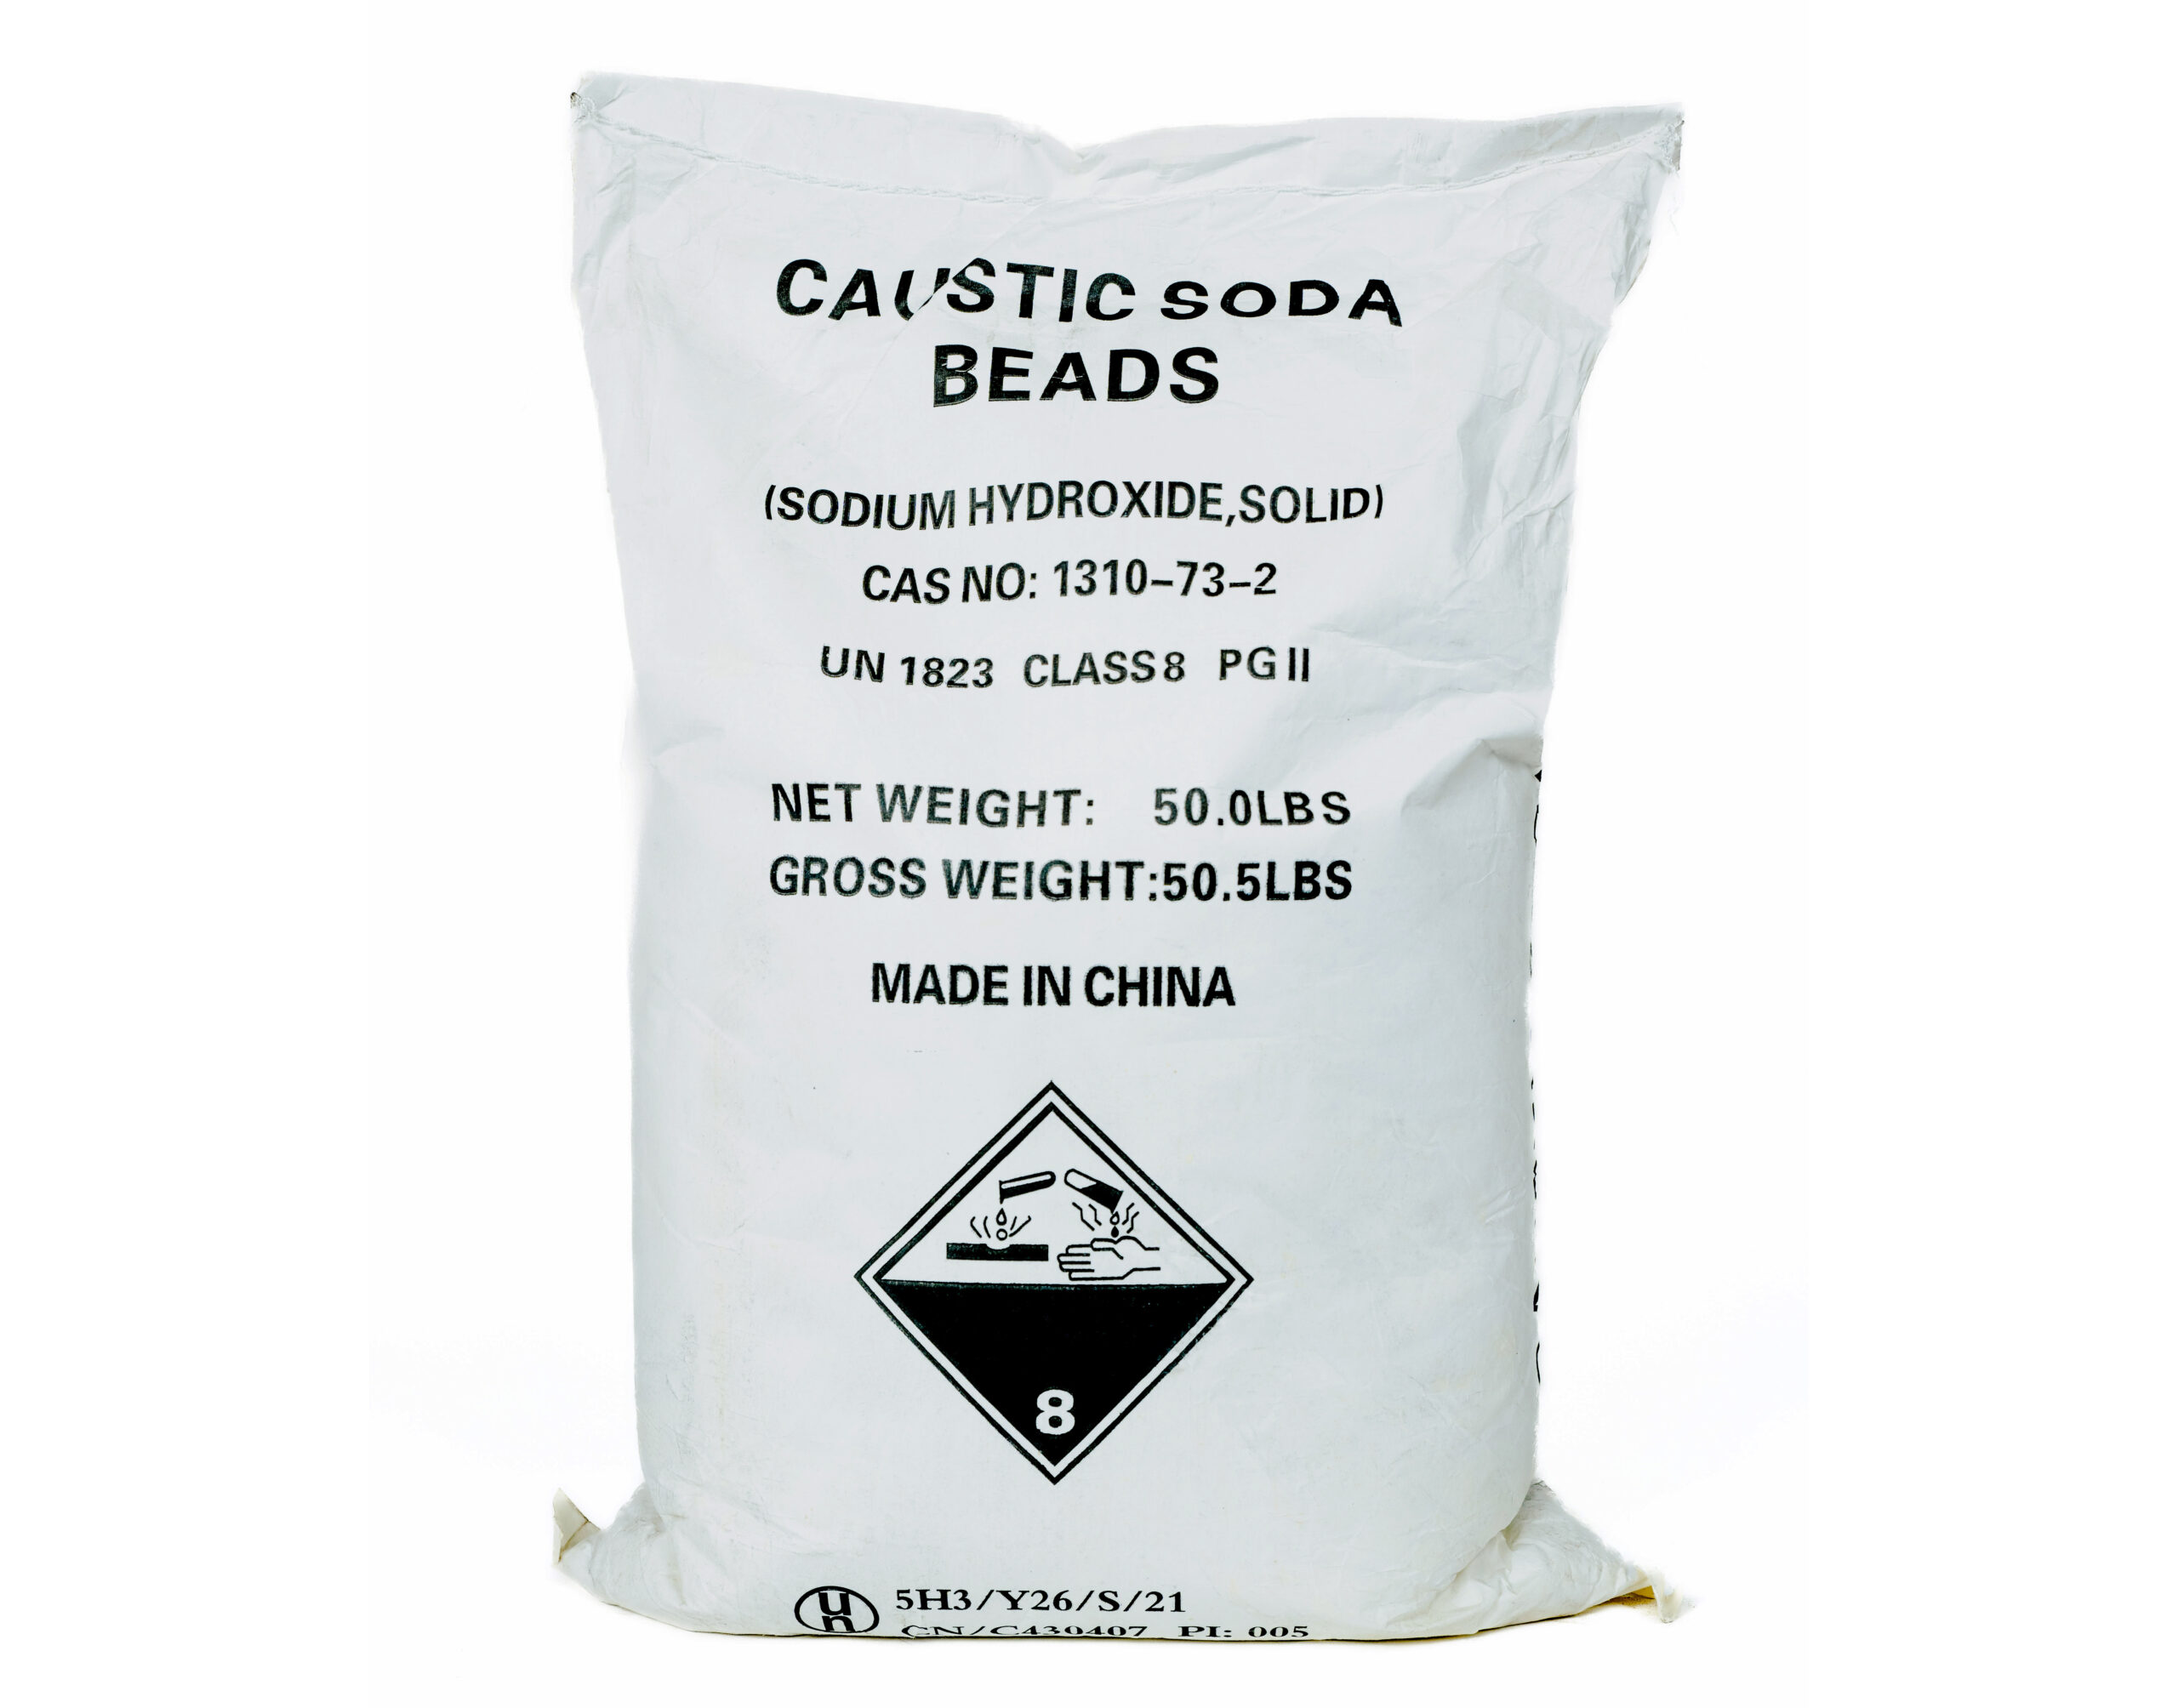 A white bag of caustic soda beans with the following labels: “Caustic Soda Beads (Sodium Hydroxide Solid) Cas No: 1310-73-2. UN 1823. Class 8. PGII. Net Weight: 50.0lbs. Gross Weight: 50.5lbs. Made in China."